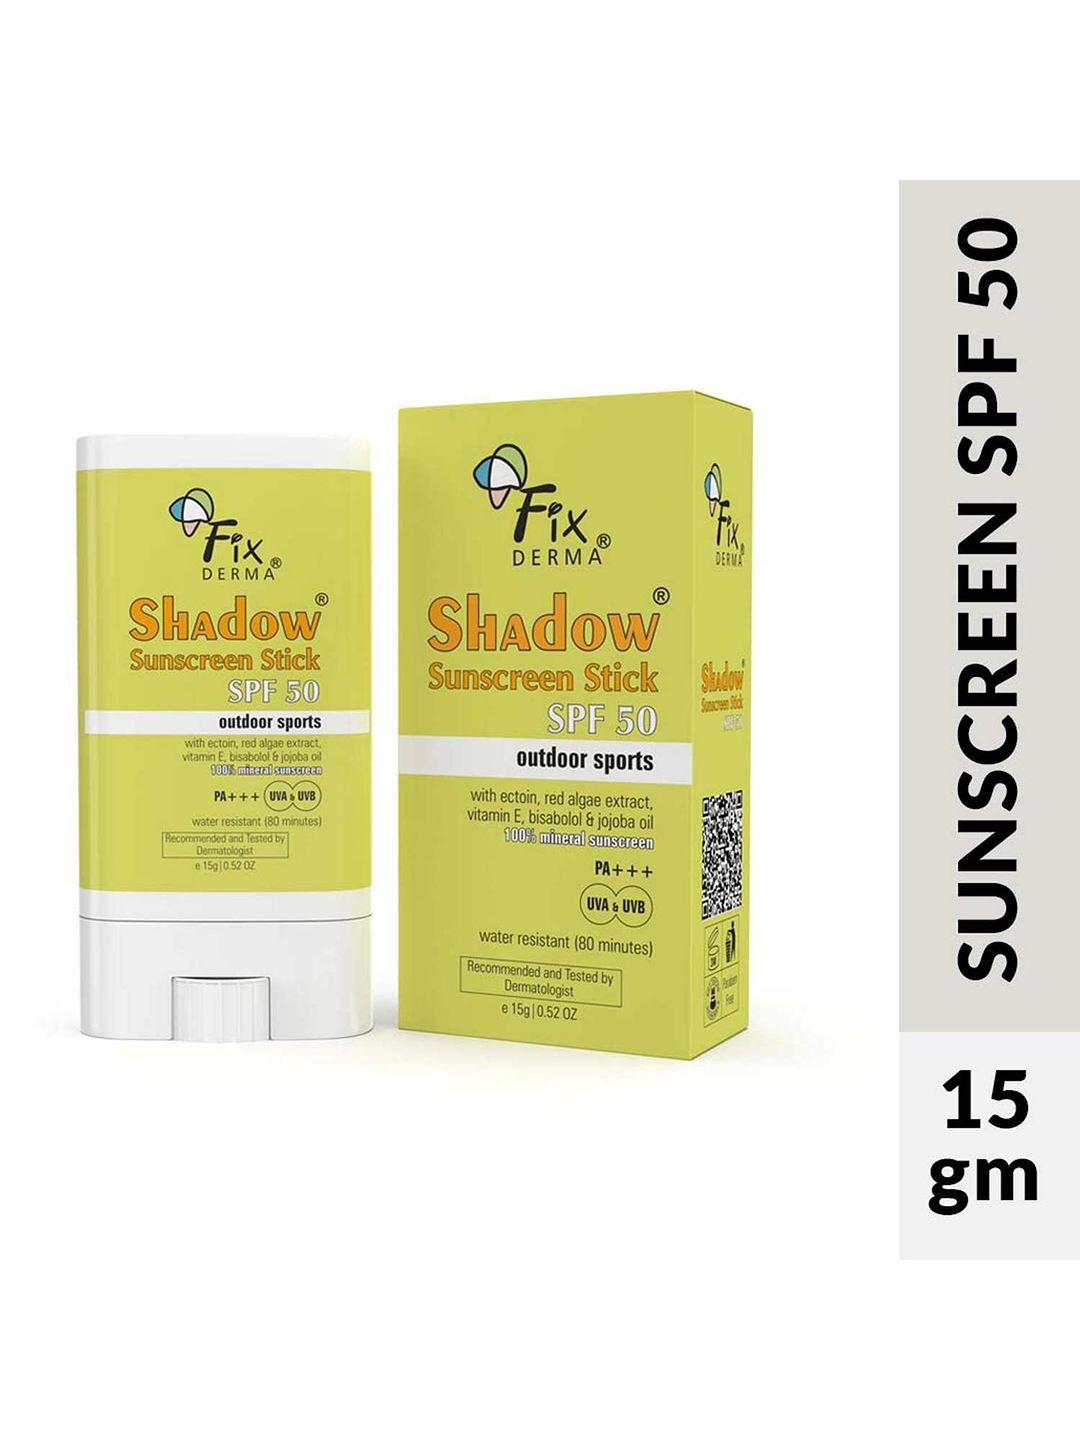 fixderma spf 50 water resistant shadow sunscreen stick with ectonin 15 g - white